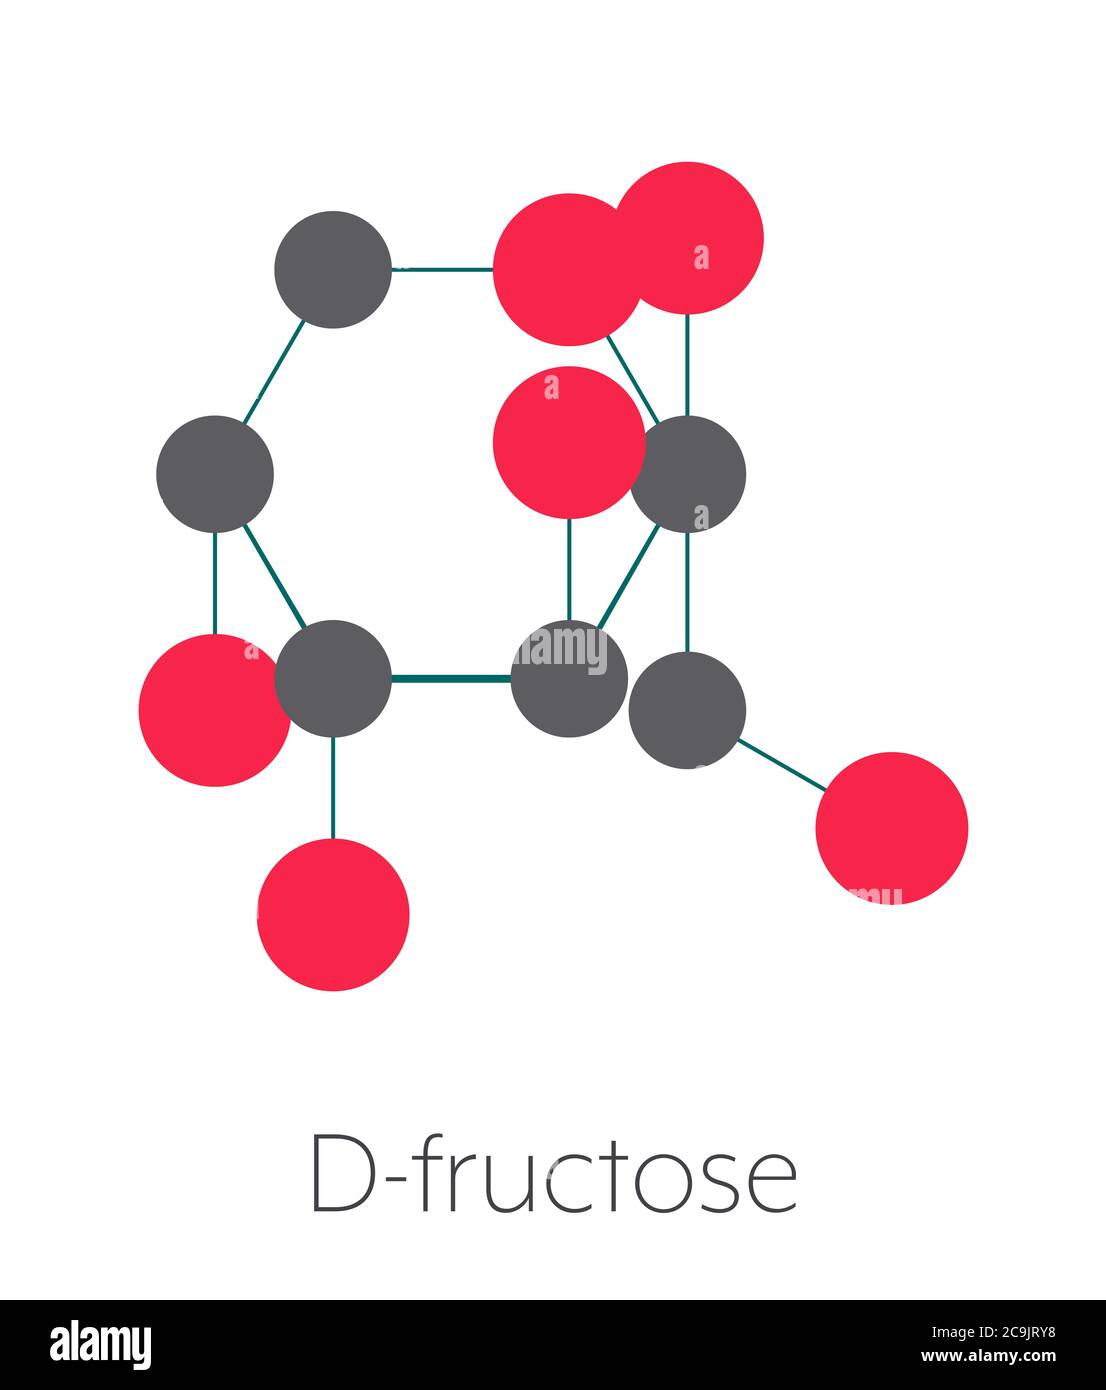 Fructose (D-fructose) fruit sugar molecule. Component of high-fructose corn syrup (HFCS). Stylized skeletal formula (chemical structure). Atoms are sh Stock Photo